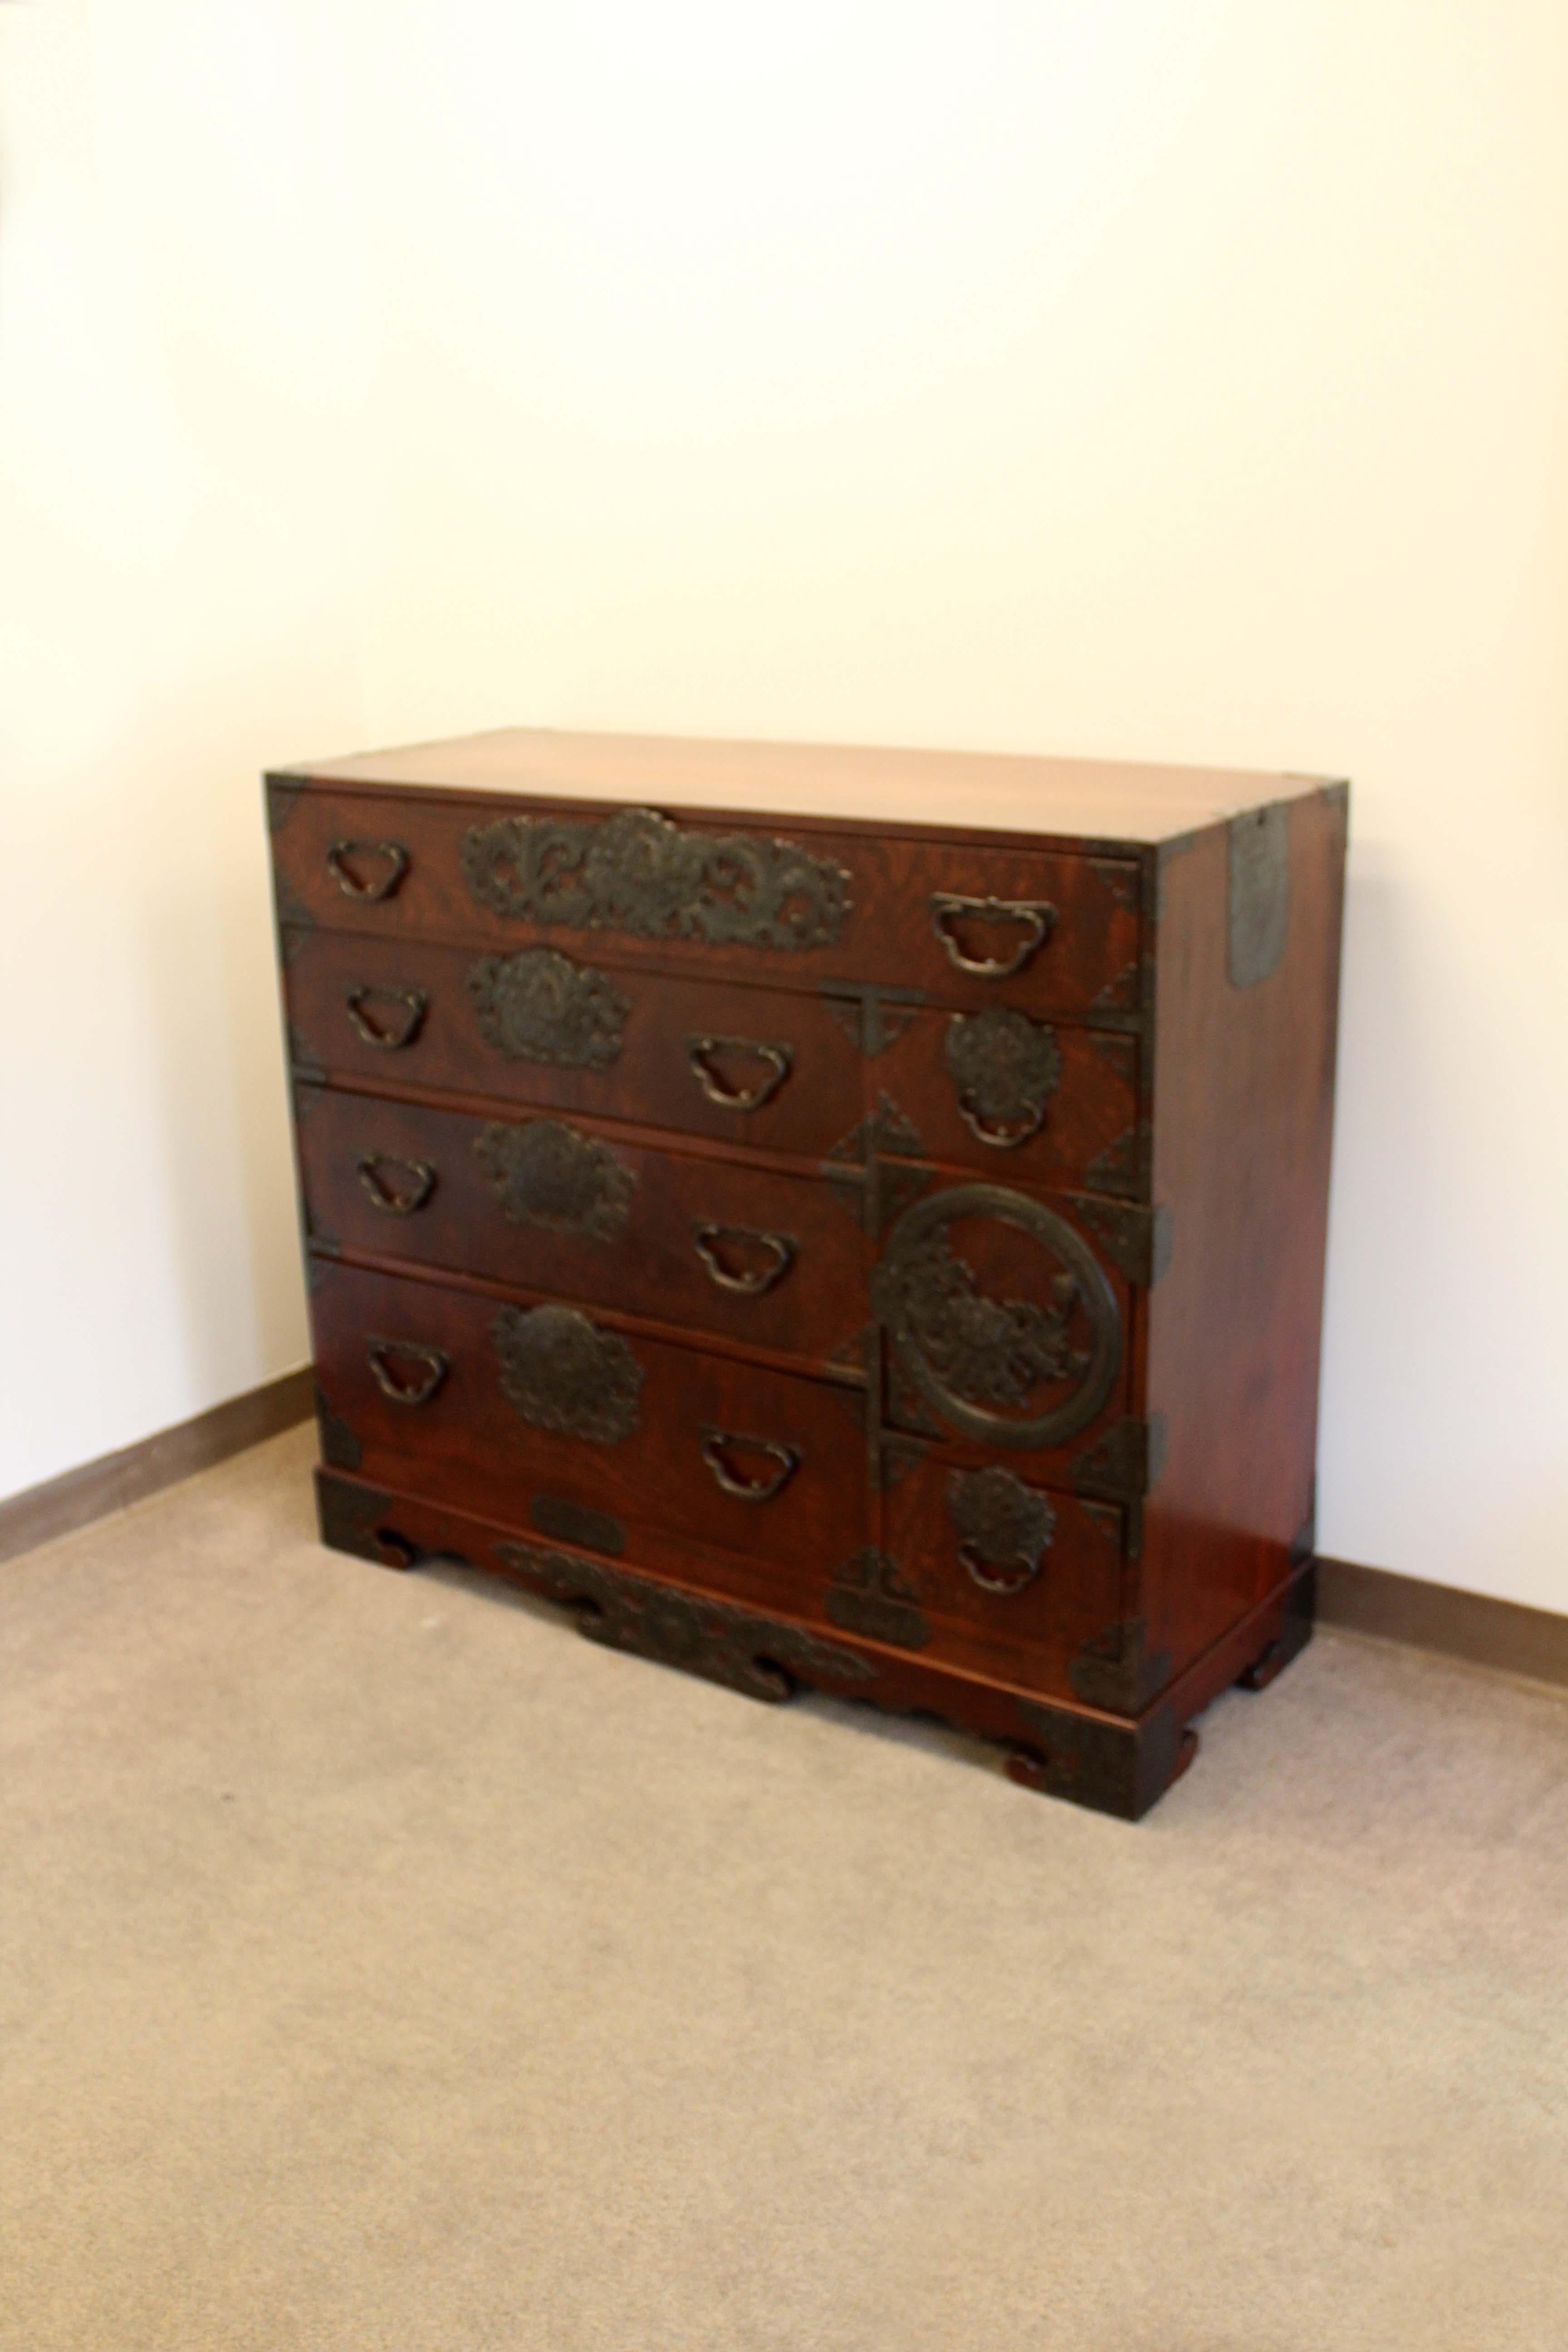 For your consideration is this Sendai Tansu Japanese Chest from the Taisho Period made of Keyaki Wood. Dimensions: 46.25